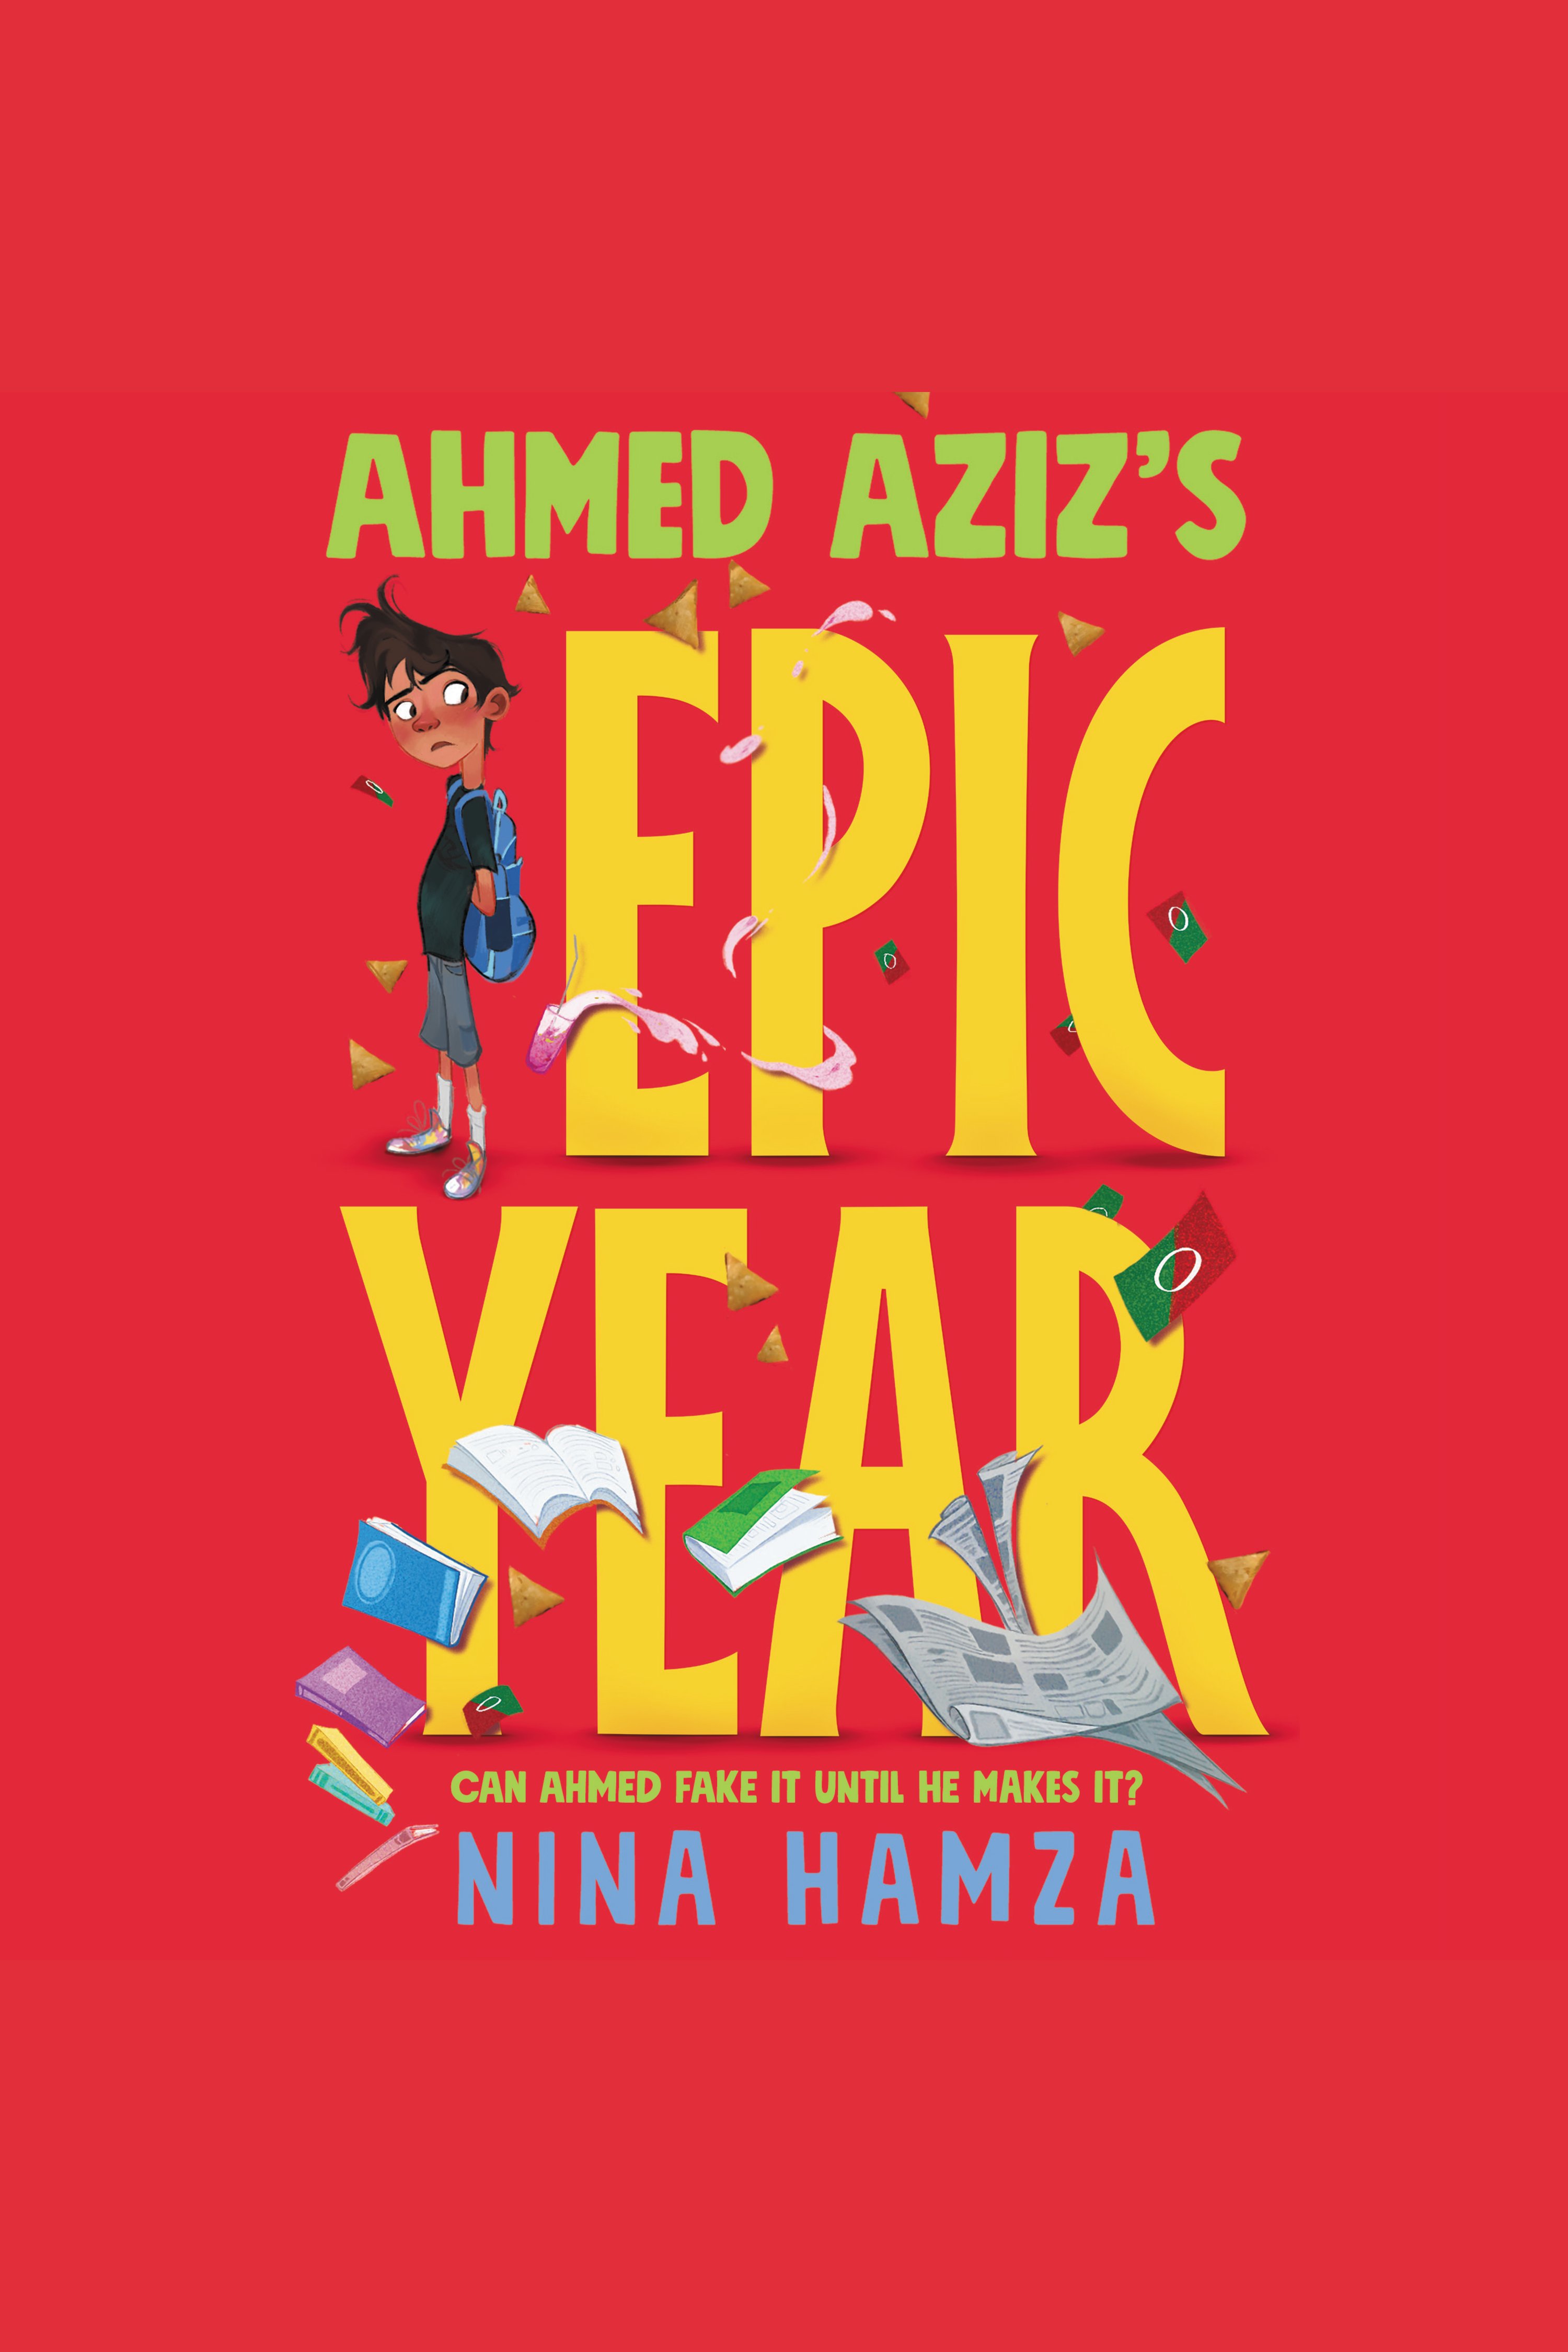 Ahmed Aziz's epic year cover image